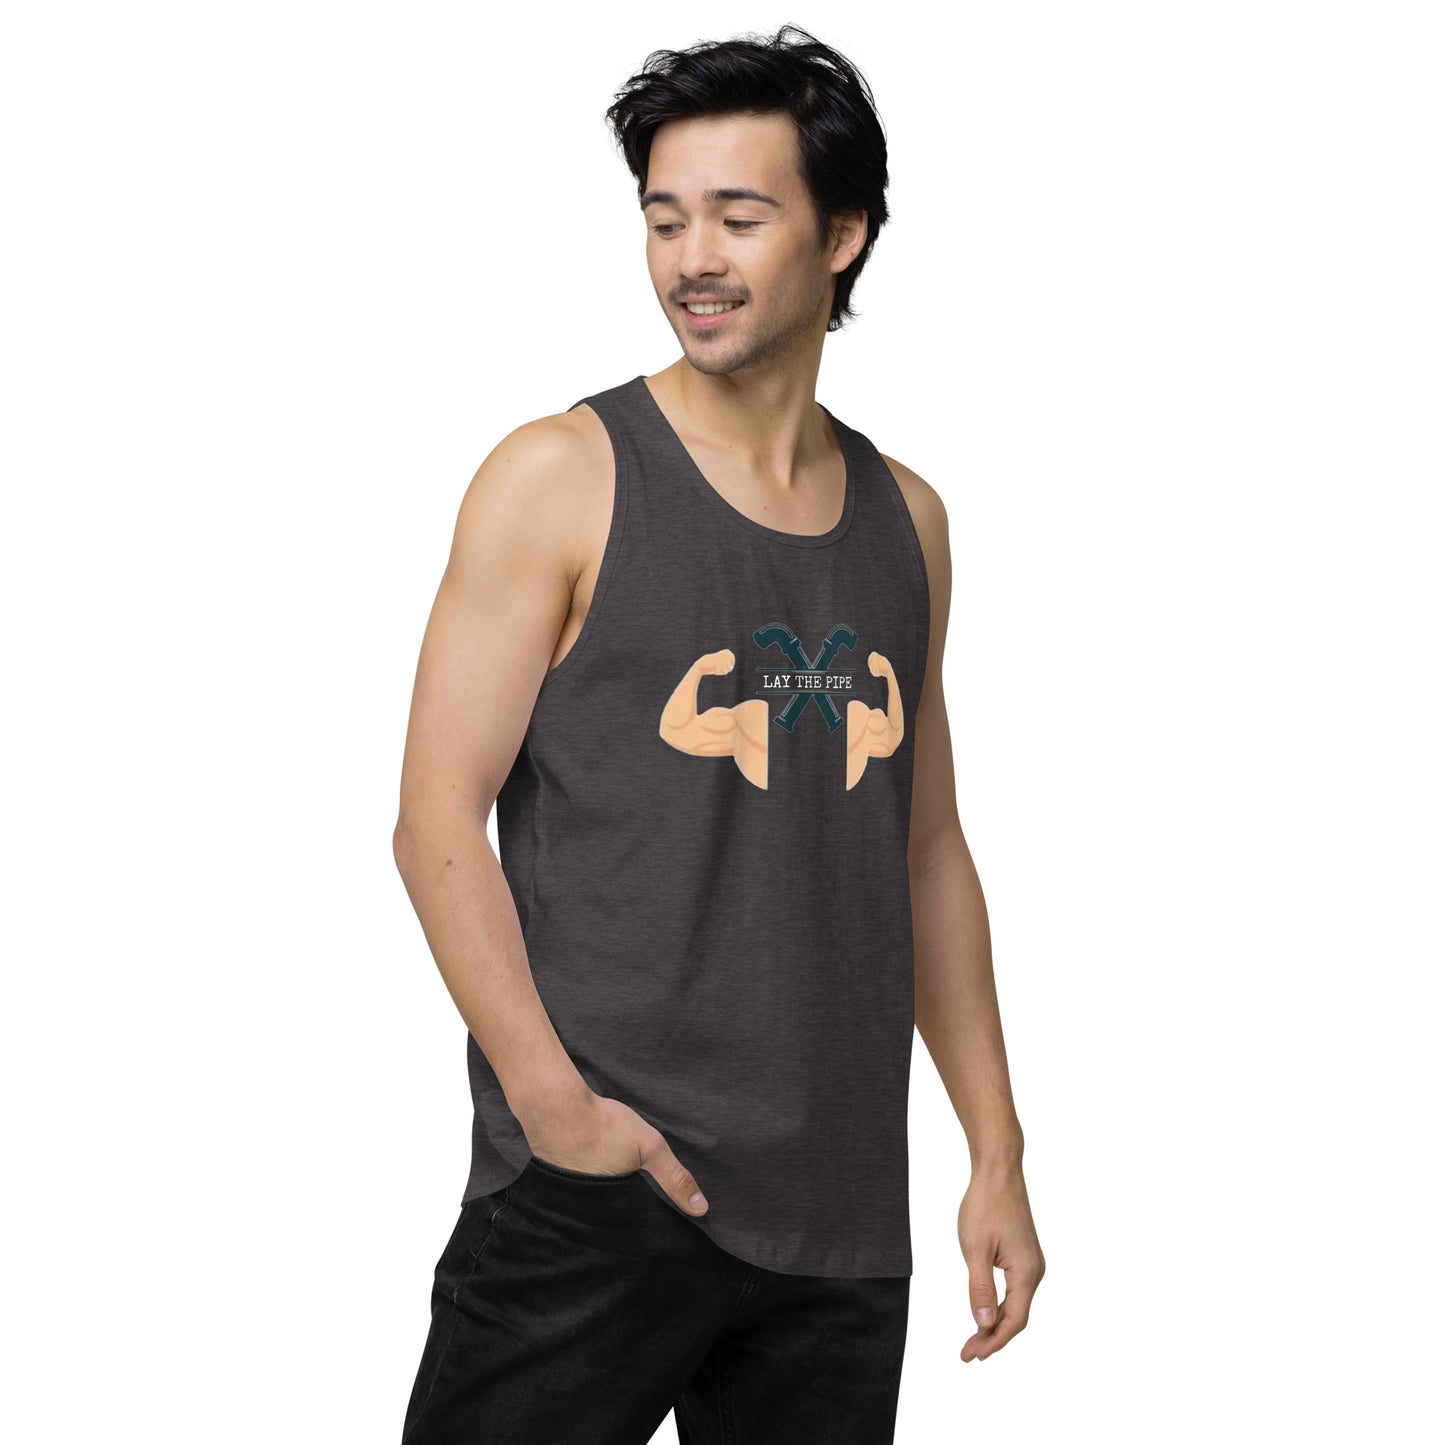 “LAY THE PIPE” Graphic Tank